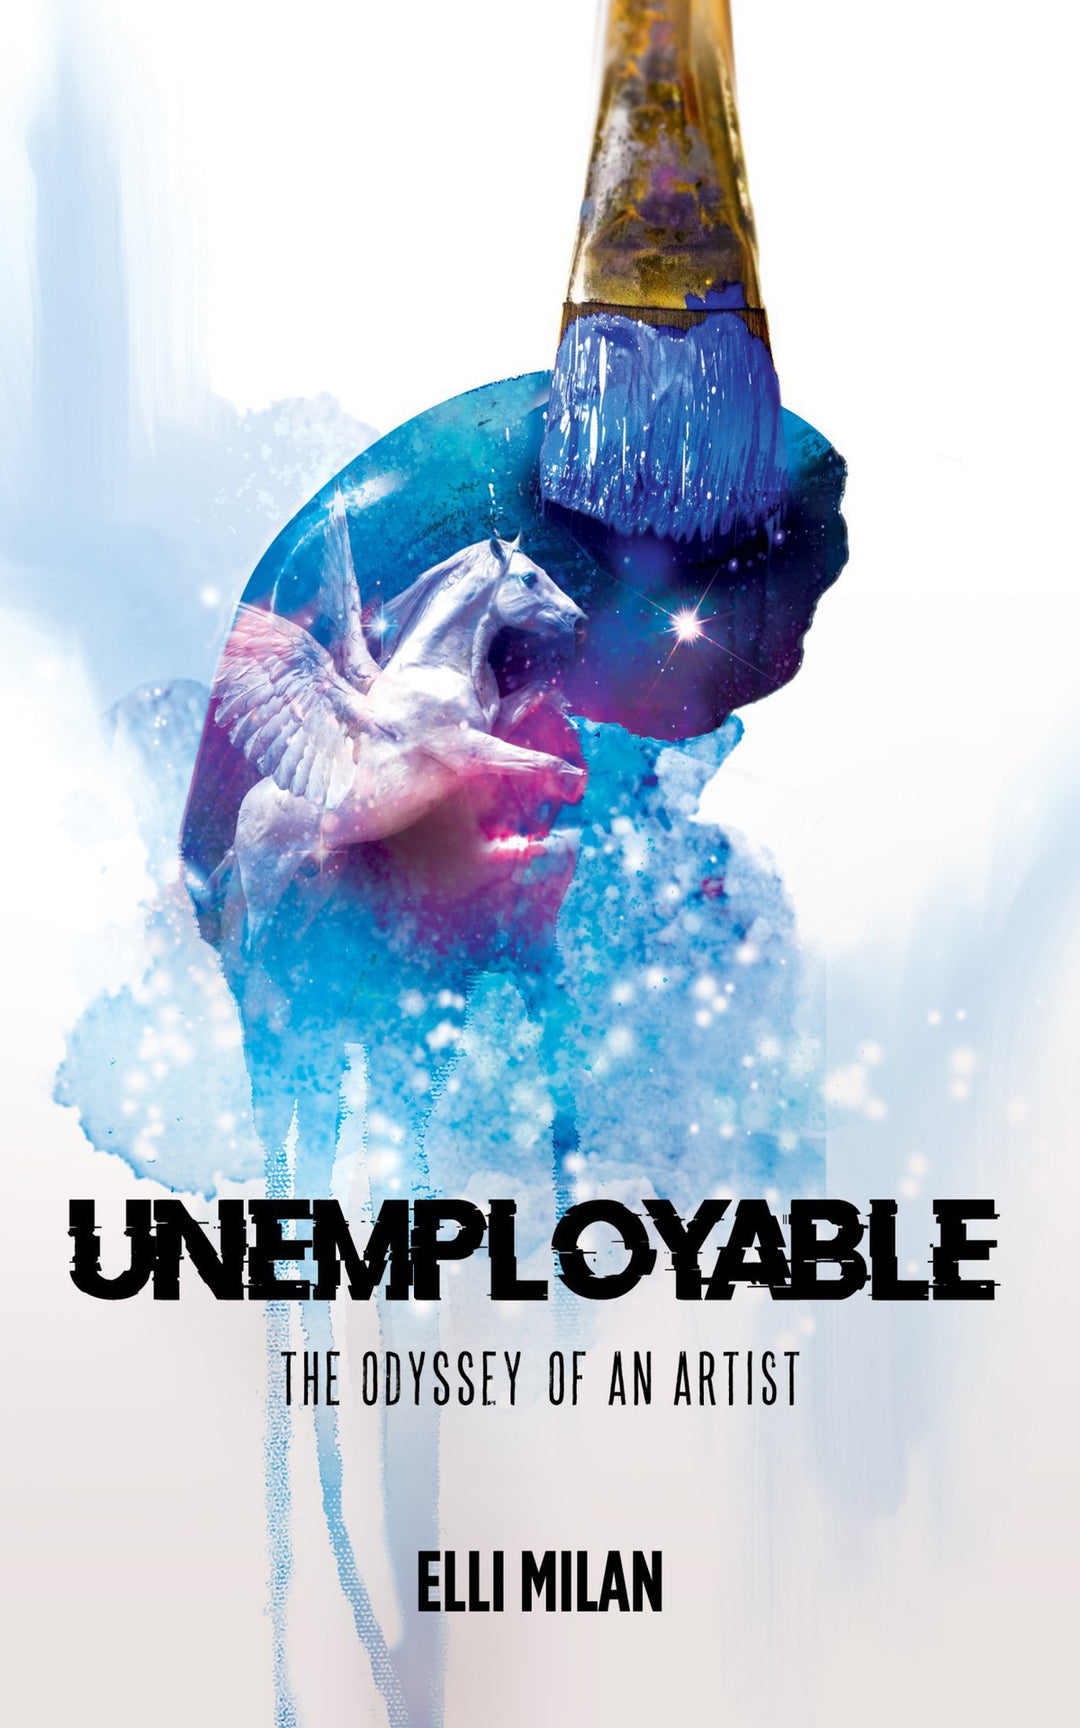 Unemployable: The Odyssey of an Artist (Special Edition)